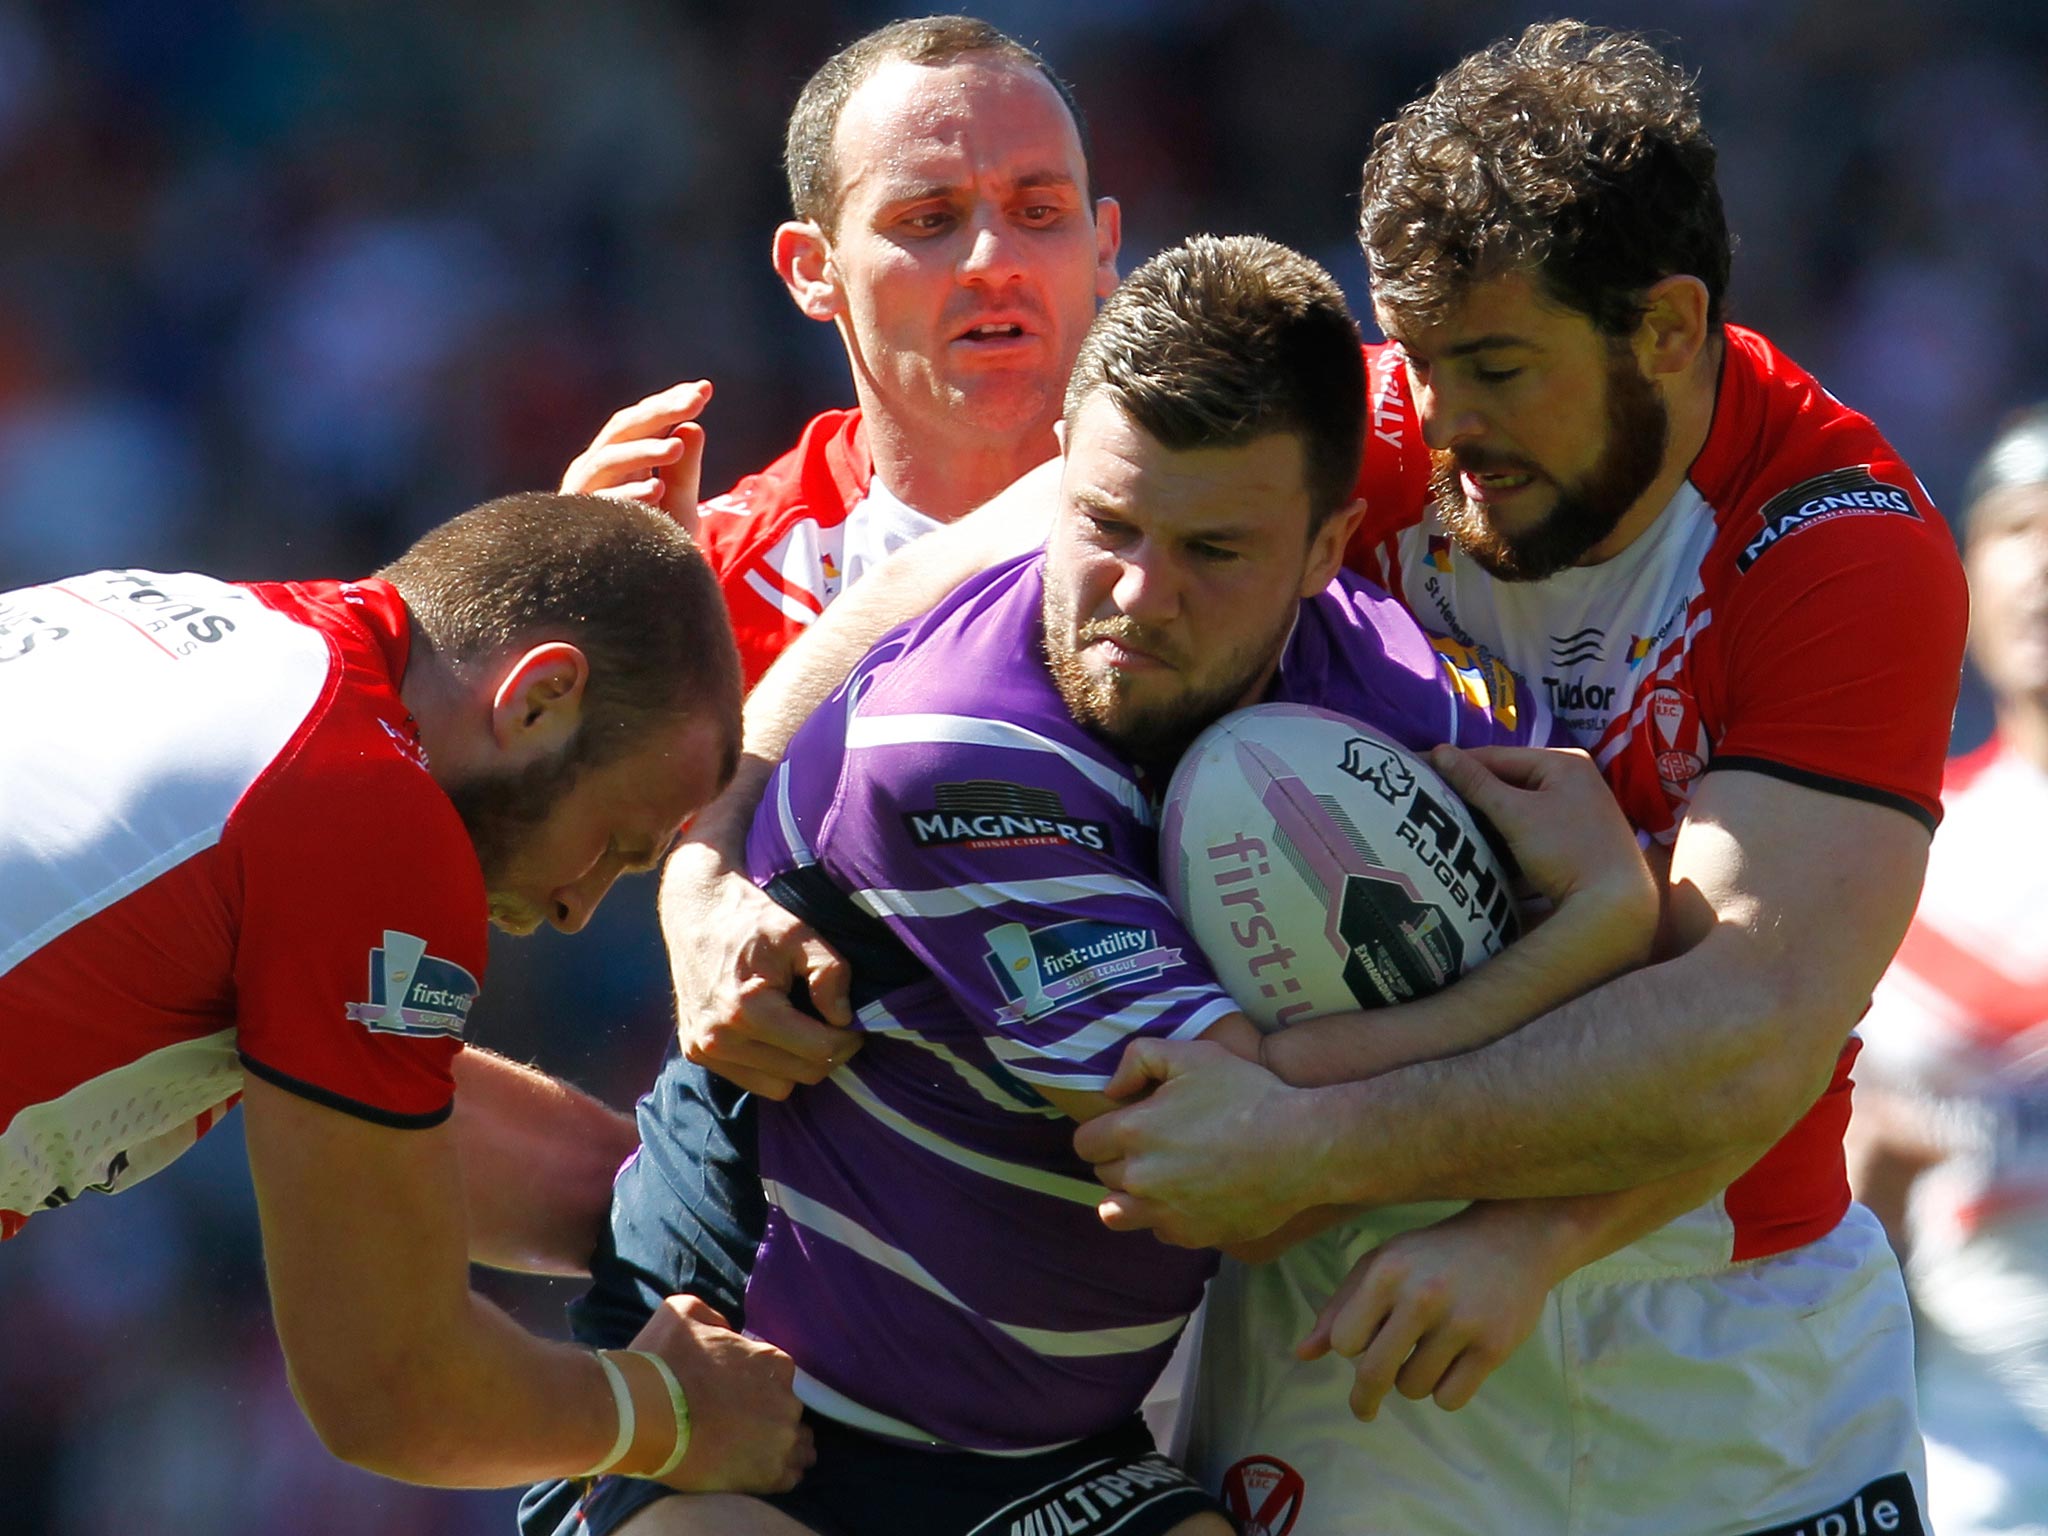 Darrell Goulding of Wigan is tackled by Josh Jones (L), Lance Hohaia and Paul Wellens (R) during the Super League match between St Helens and Wigan